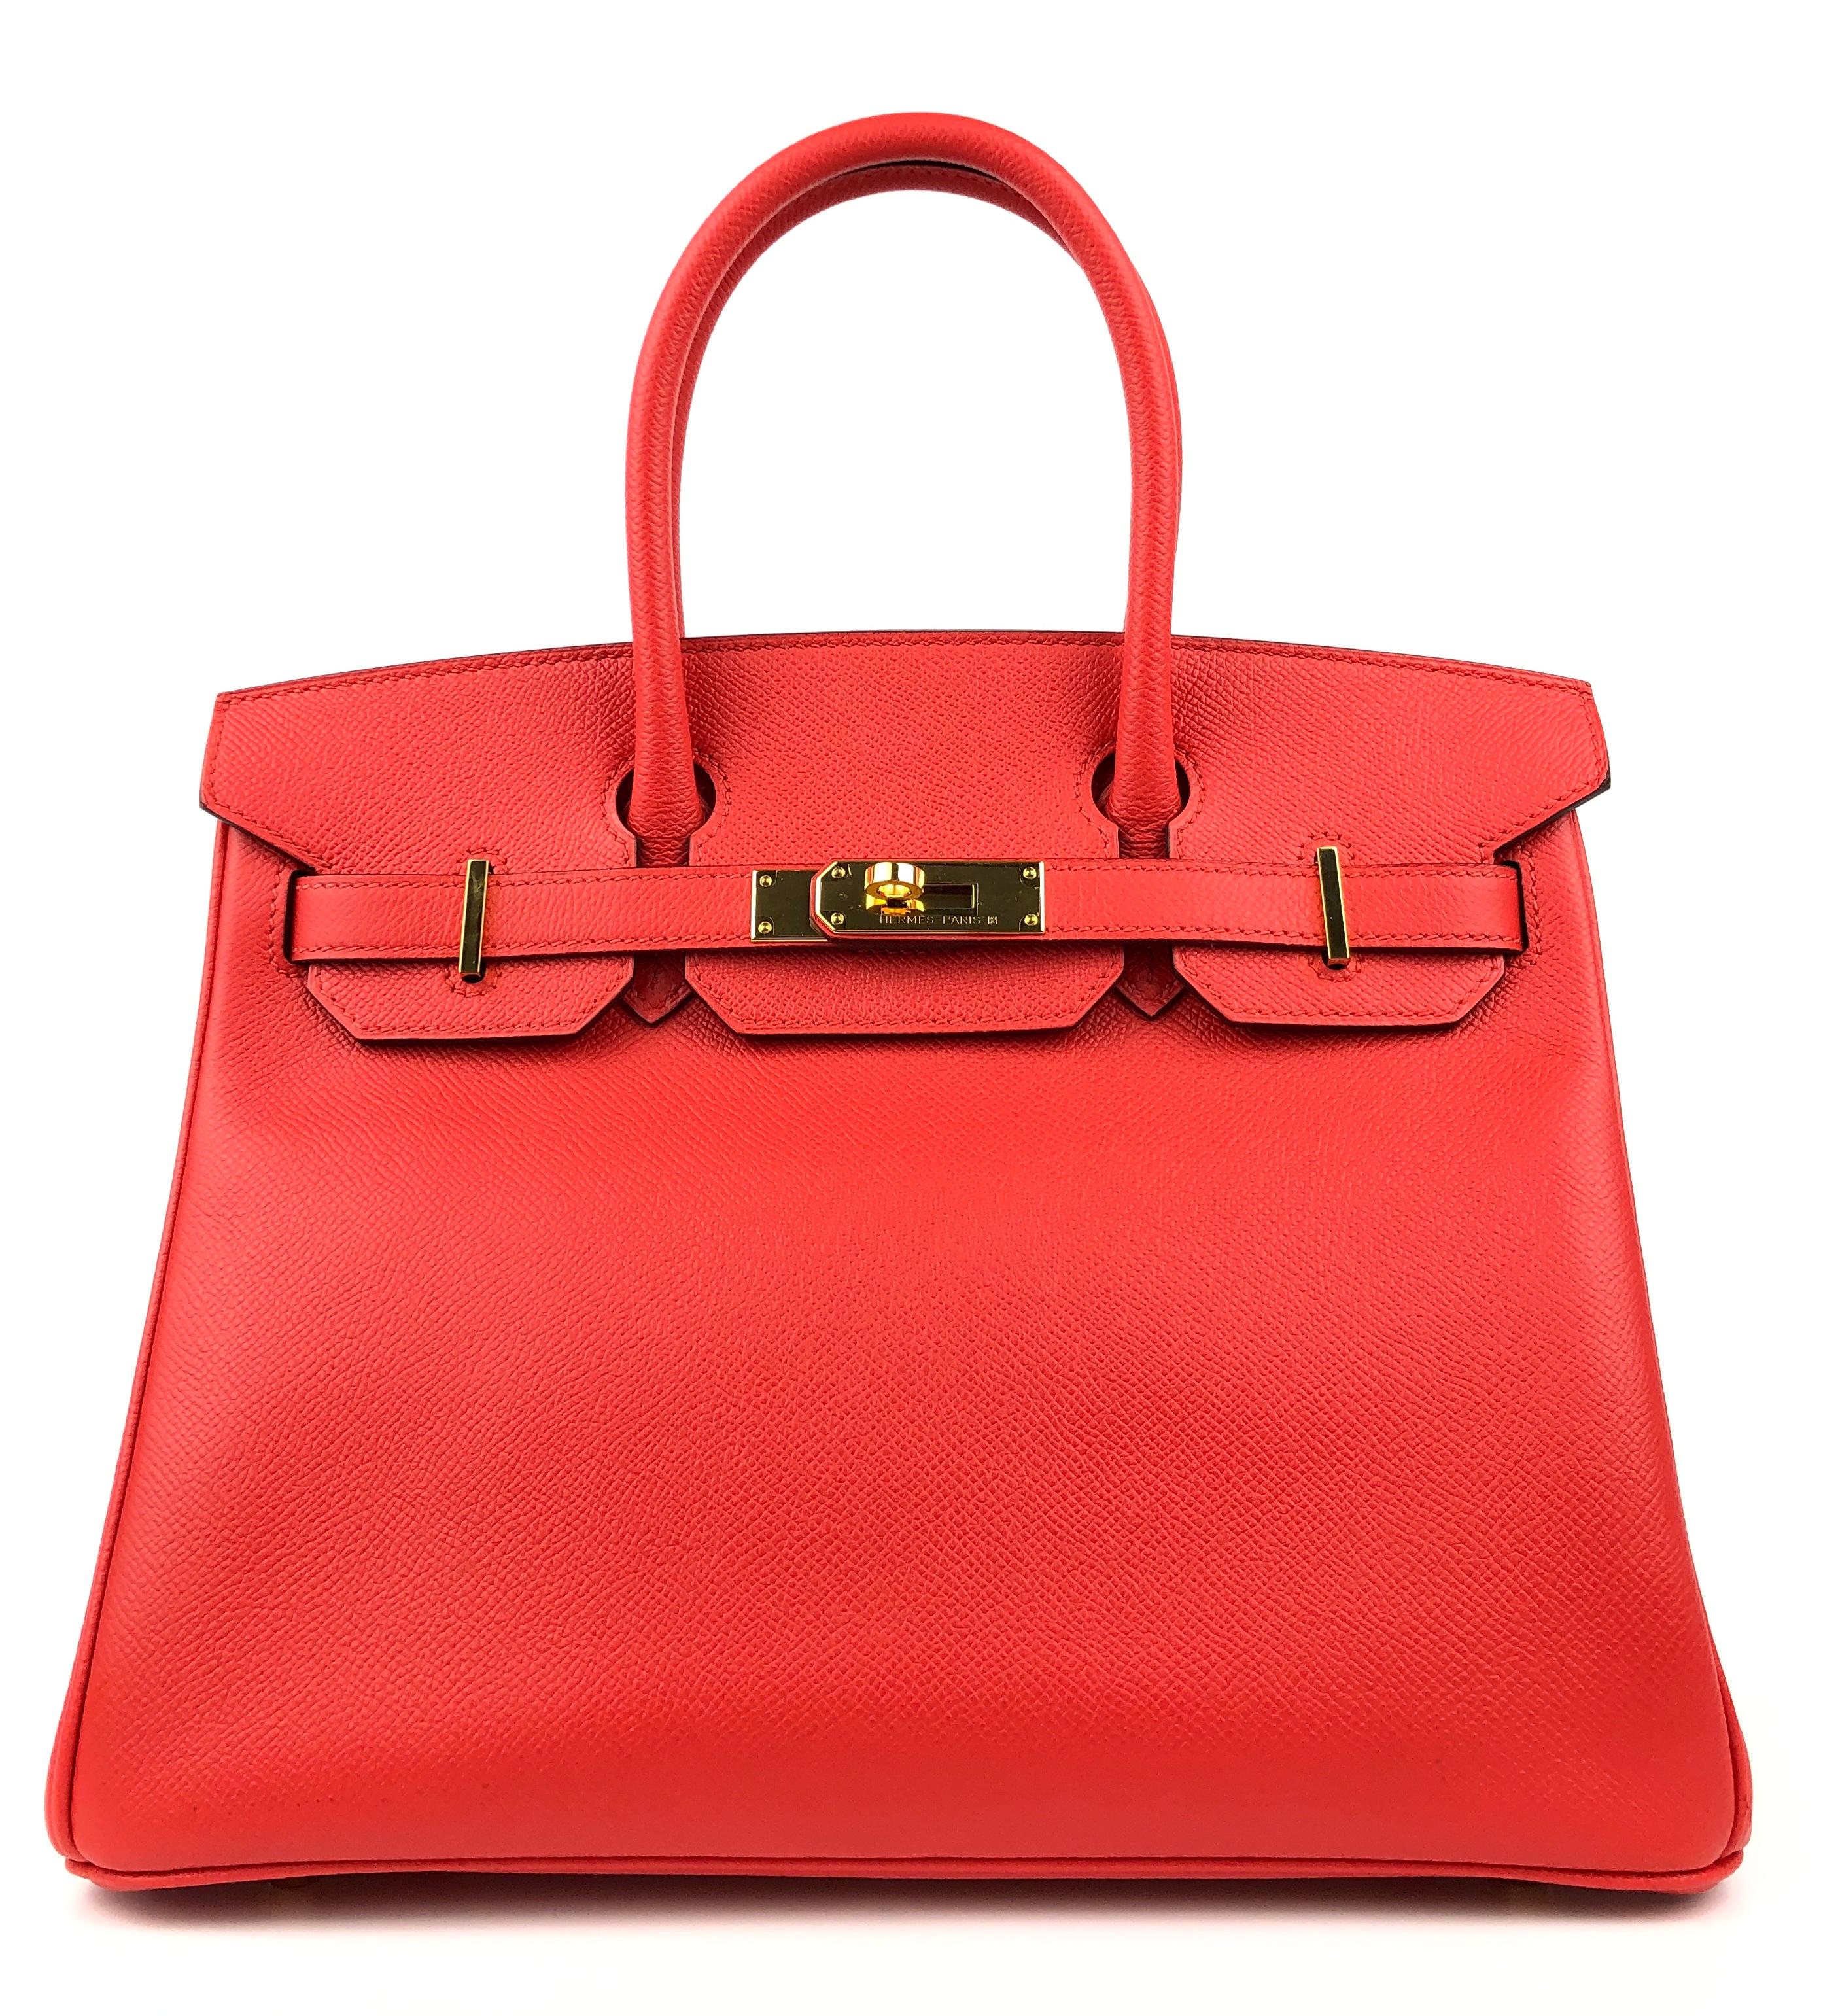 Stunning Hermes Birkin 30 Rouge Tomate Red Epsom Gold Hardware.  Excellent Pristine Condition, Plastic on Hardware, Excellent corners and Structure. X Stamp 2016.

Shop with Confidence from Lux Addicts. Authenticity Guaranteed!